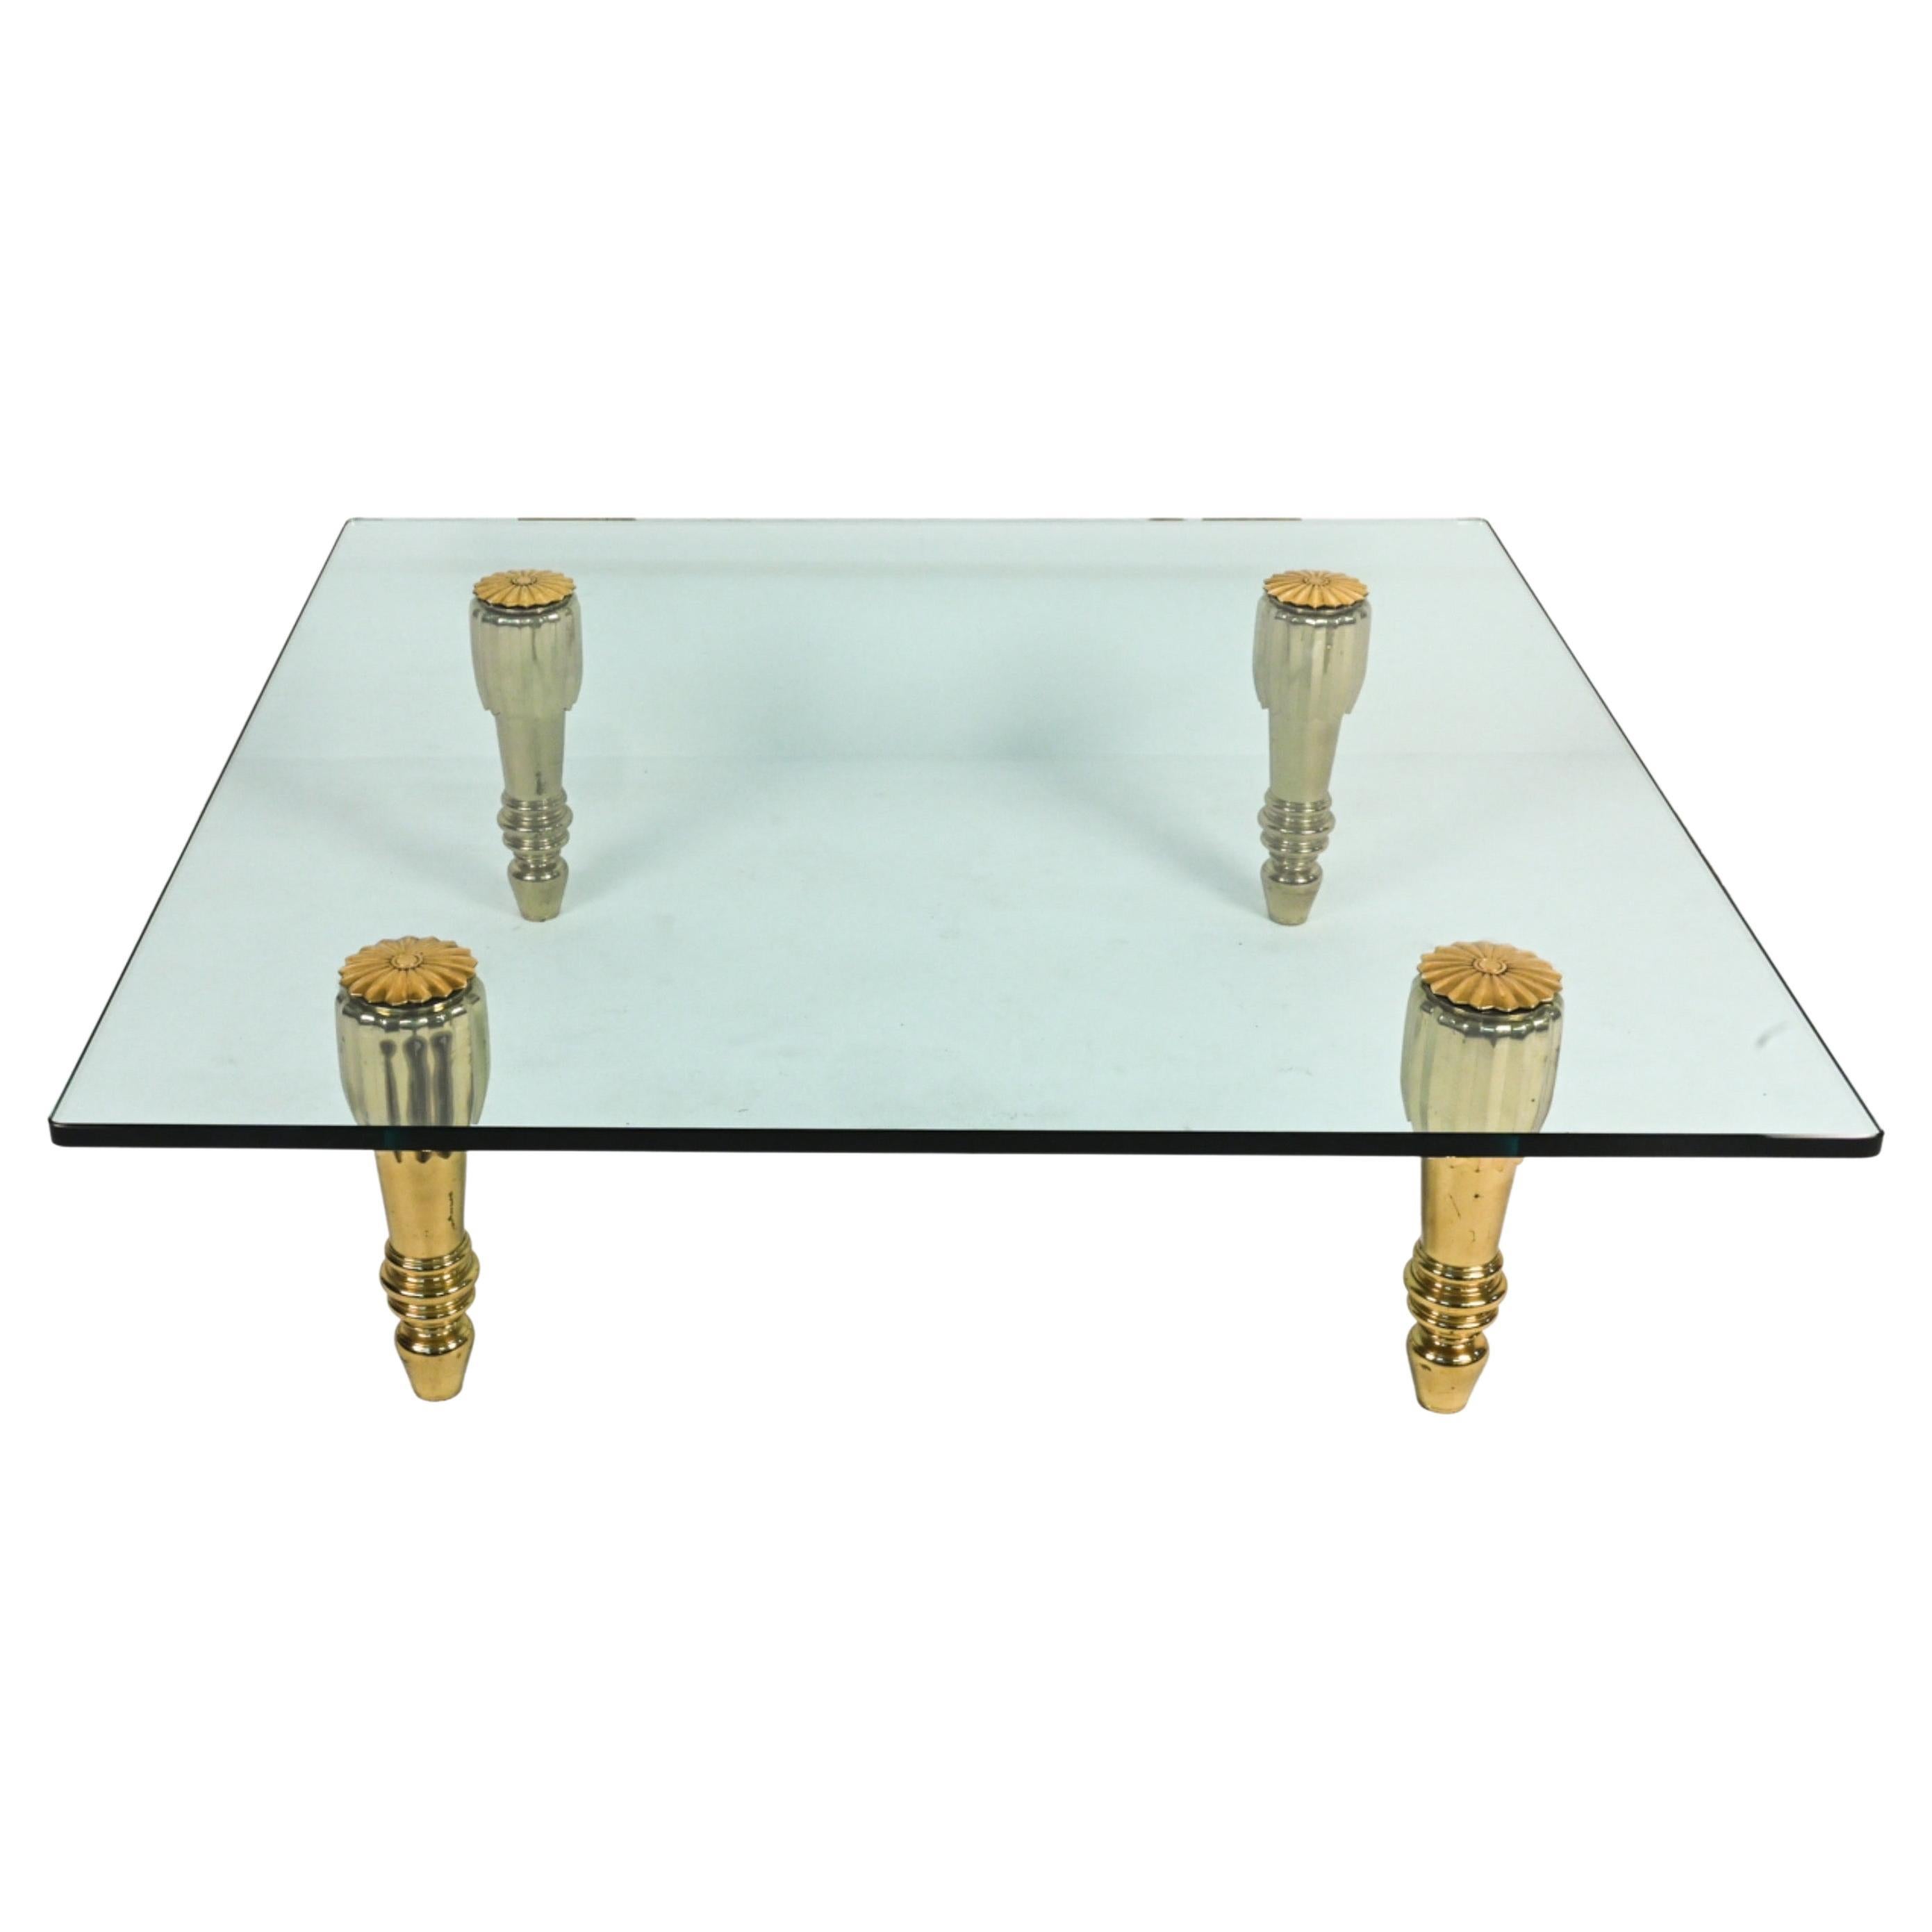  Large Square Hollywood Regency Style Glass Coffee Table with Brass Legs 